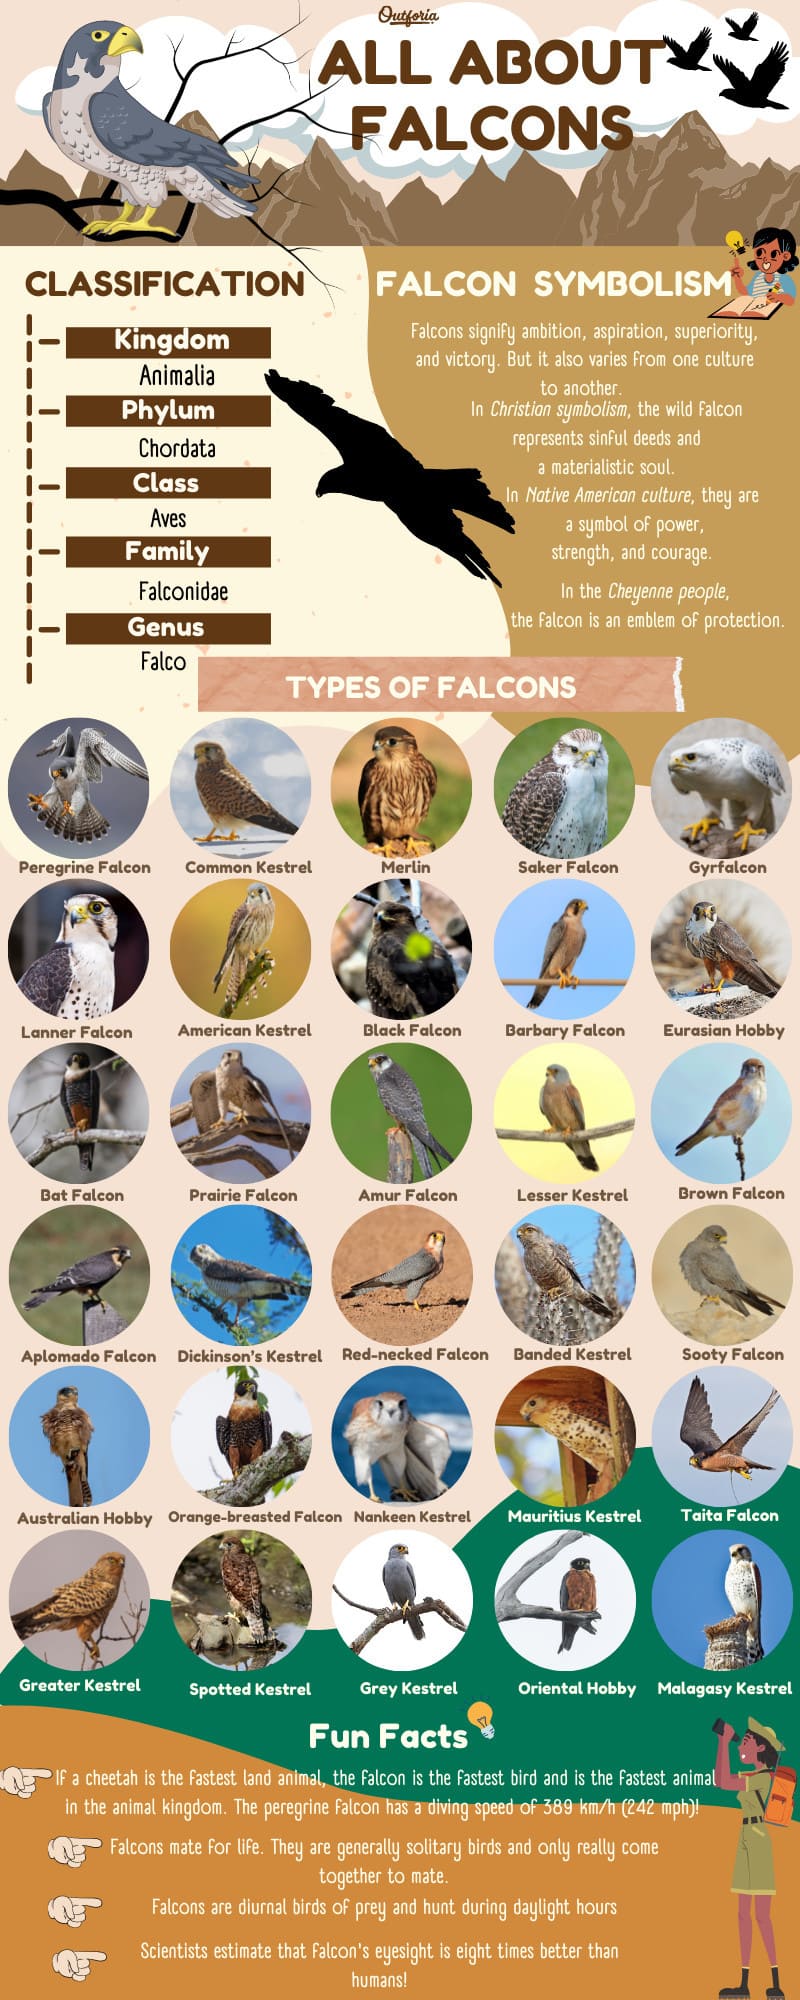 Types of falcons chart and infographic about all the different species, symbolism and more